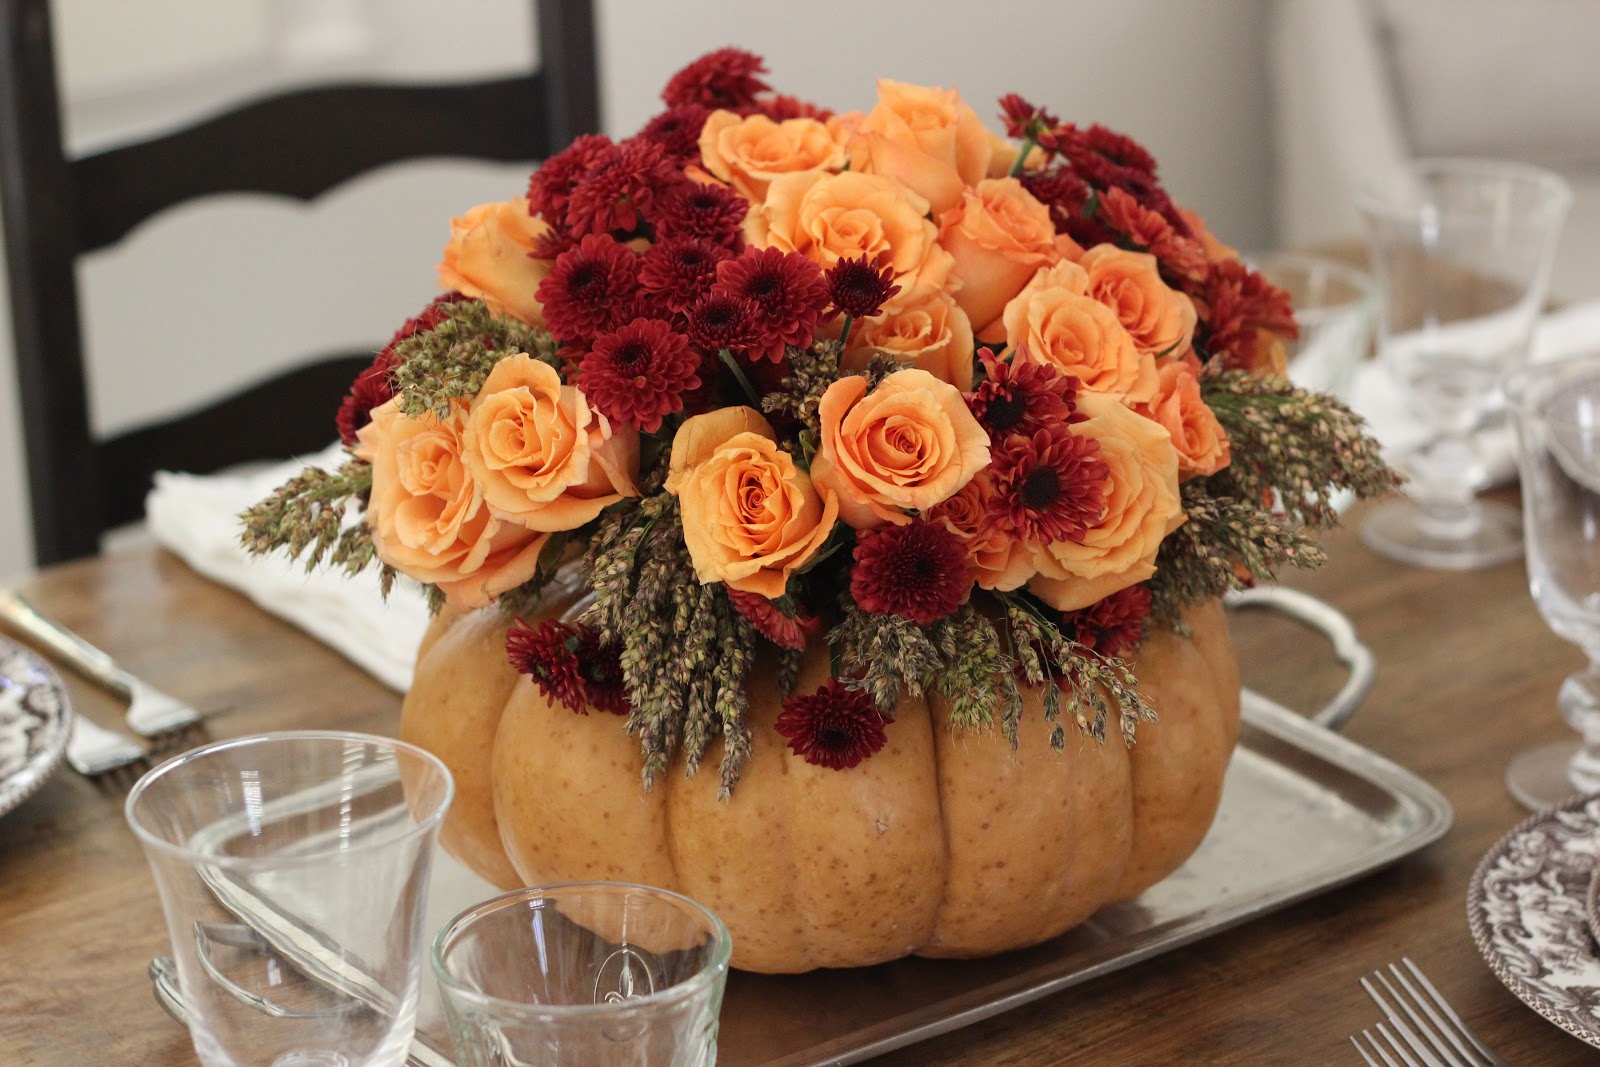 Pumpkin vase with fall flower arrangement idea silver themed cutlery thanksgiving tablescaping easy thanksgiving centerpiece decorations inspiring easy thanksgiving centerpiece and table decoration.jpg